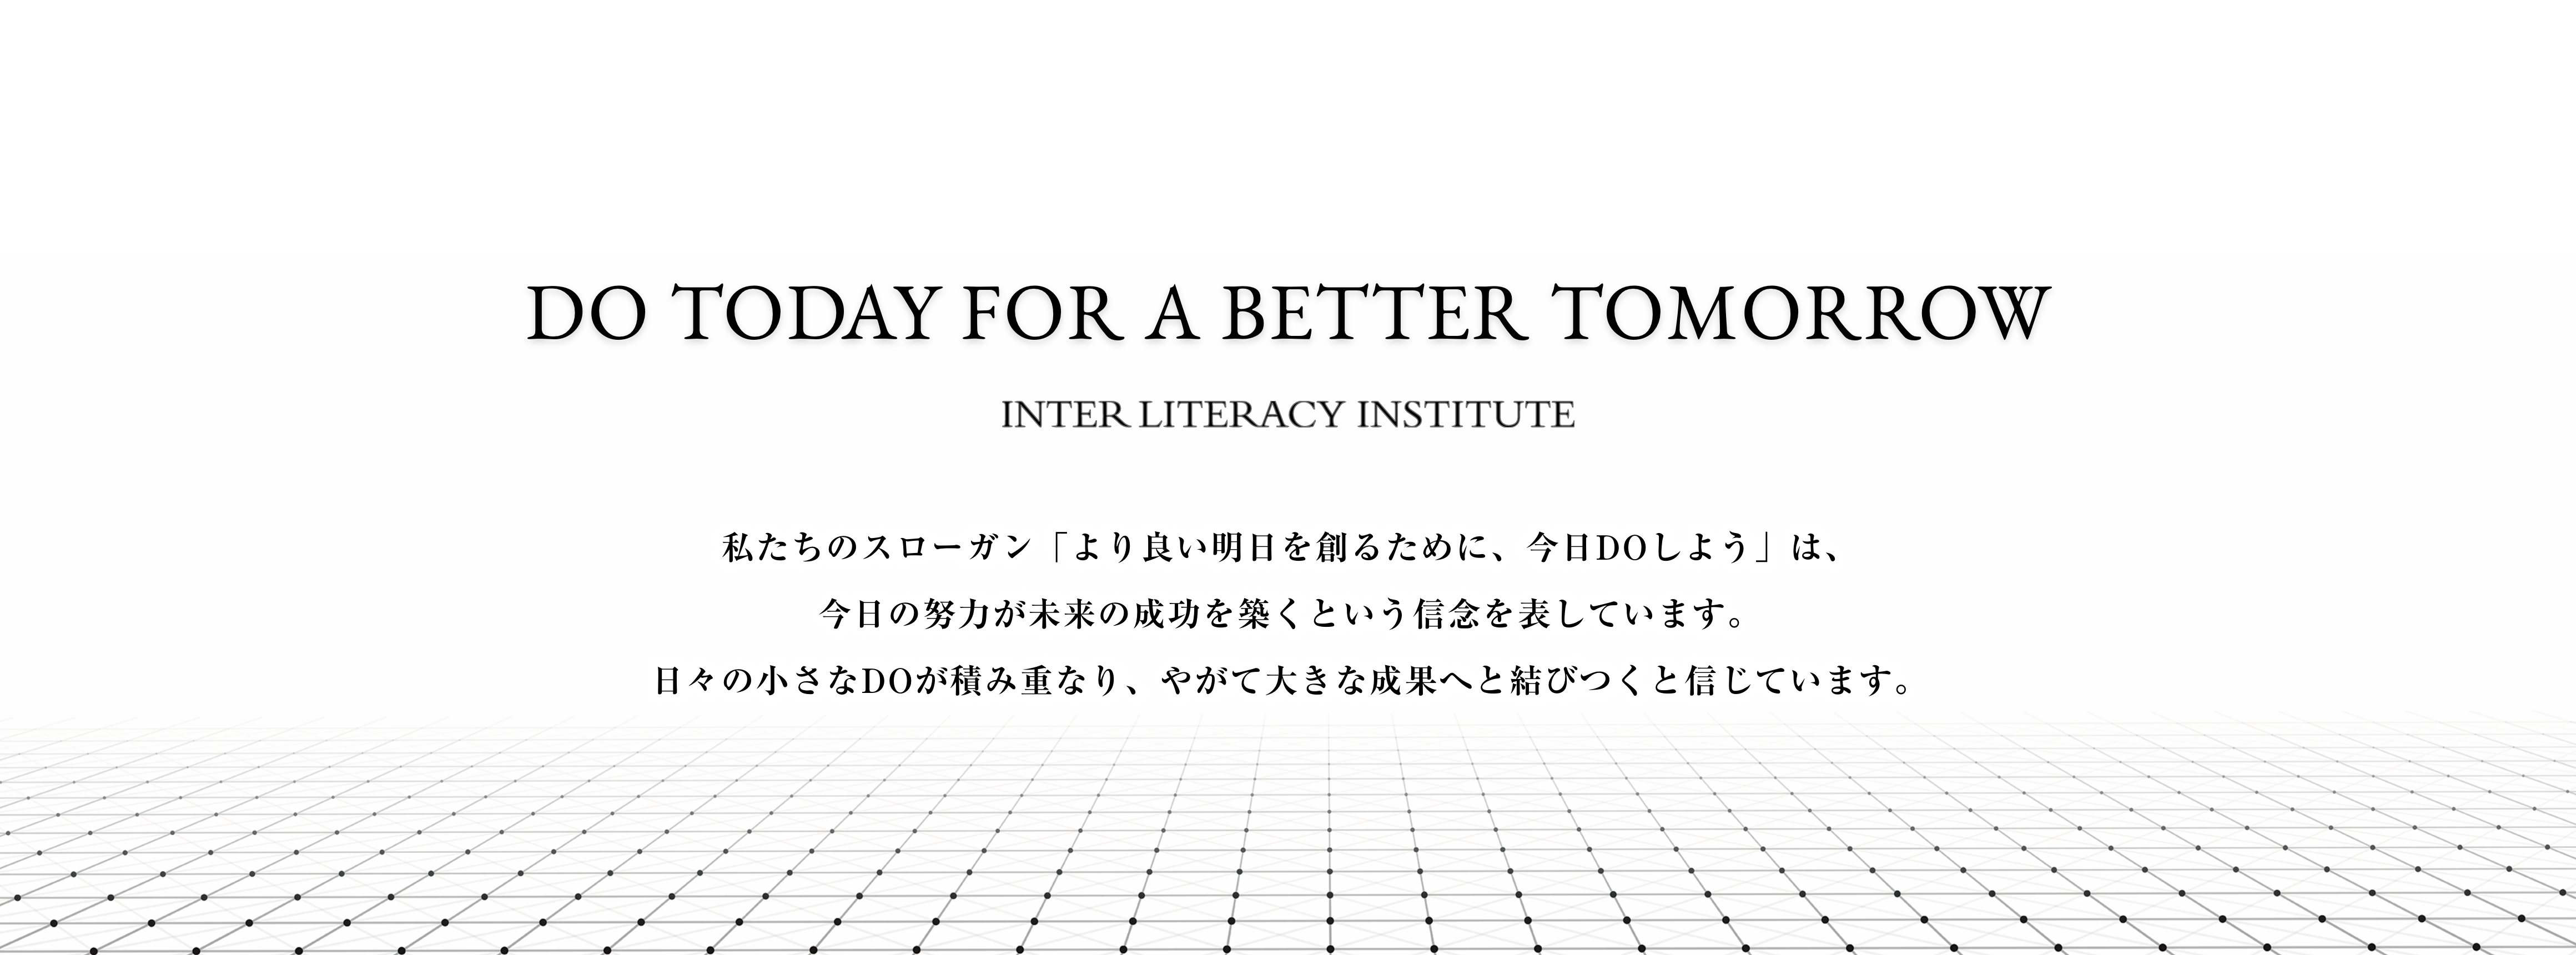 DO TODAY FOR A BETTER TOMORROW